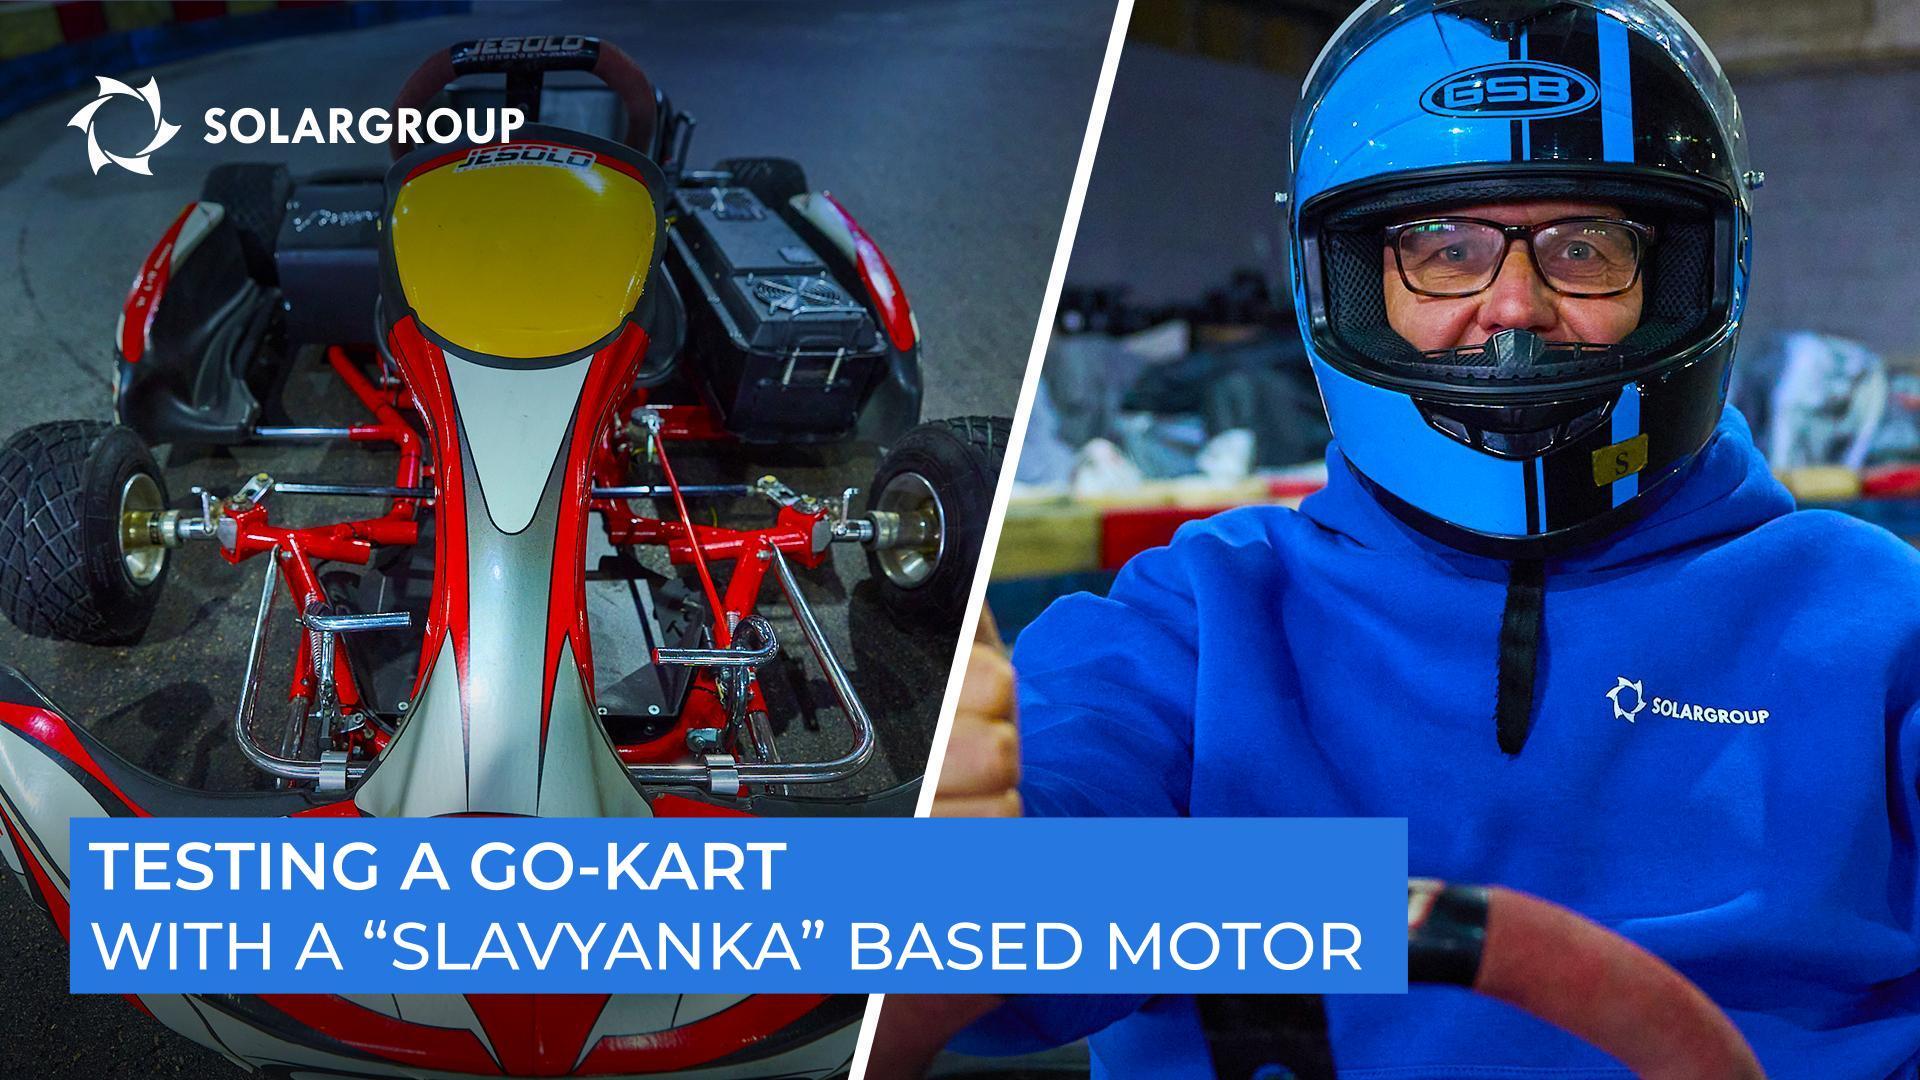 "This is the real future of electric go-karting!"